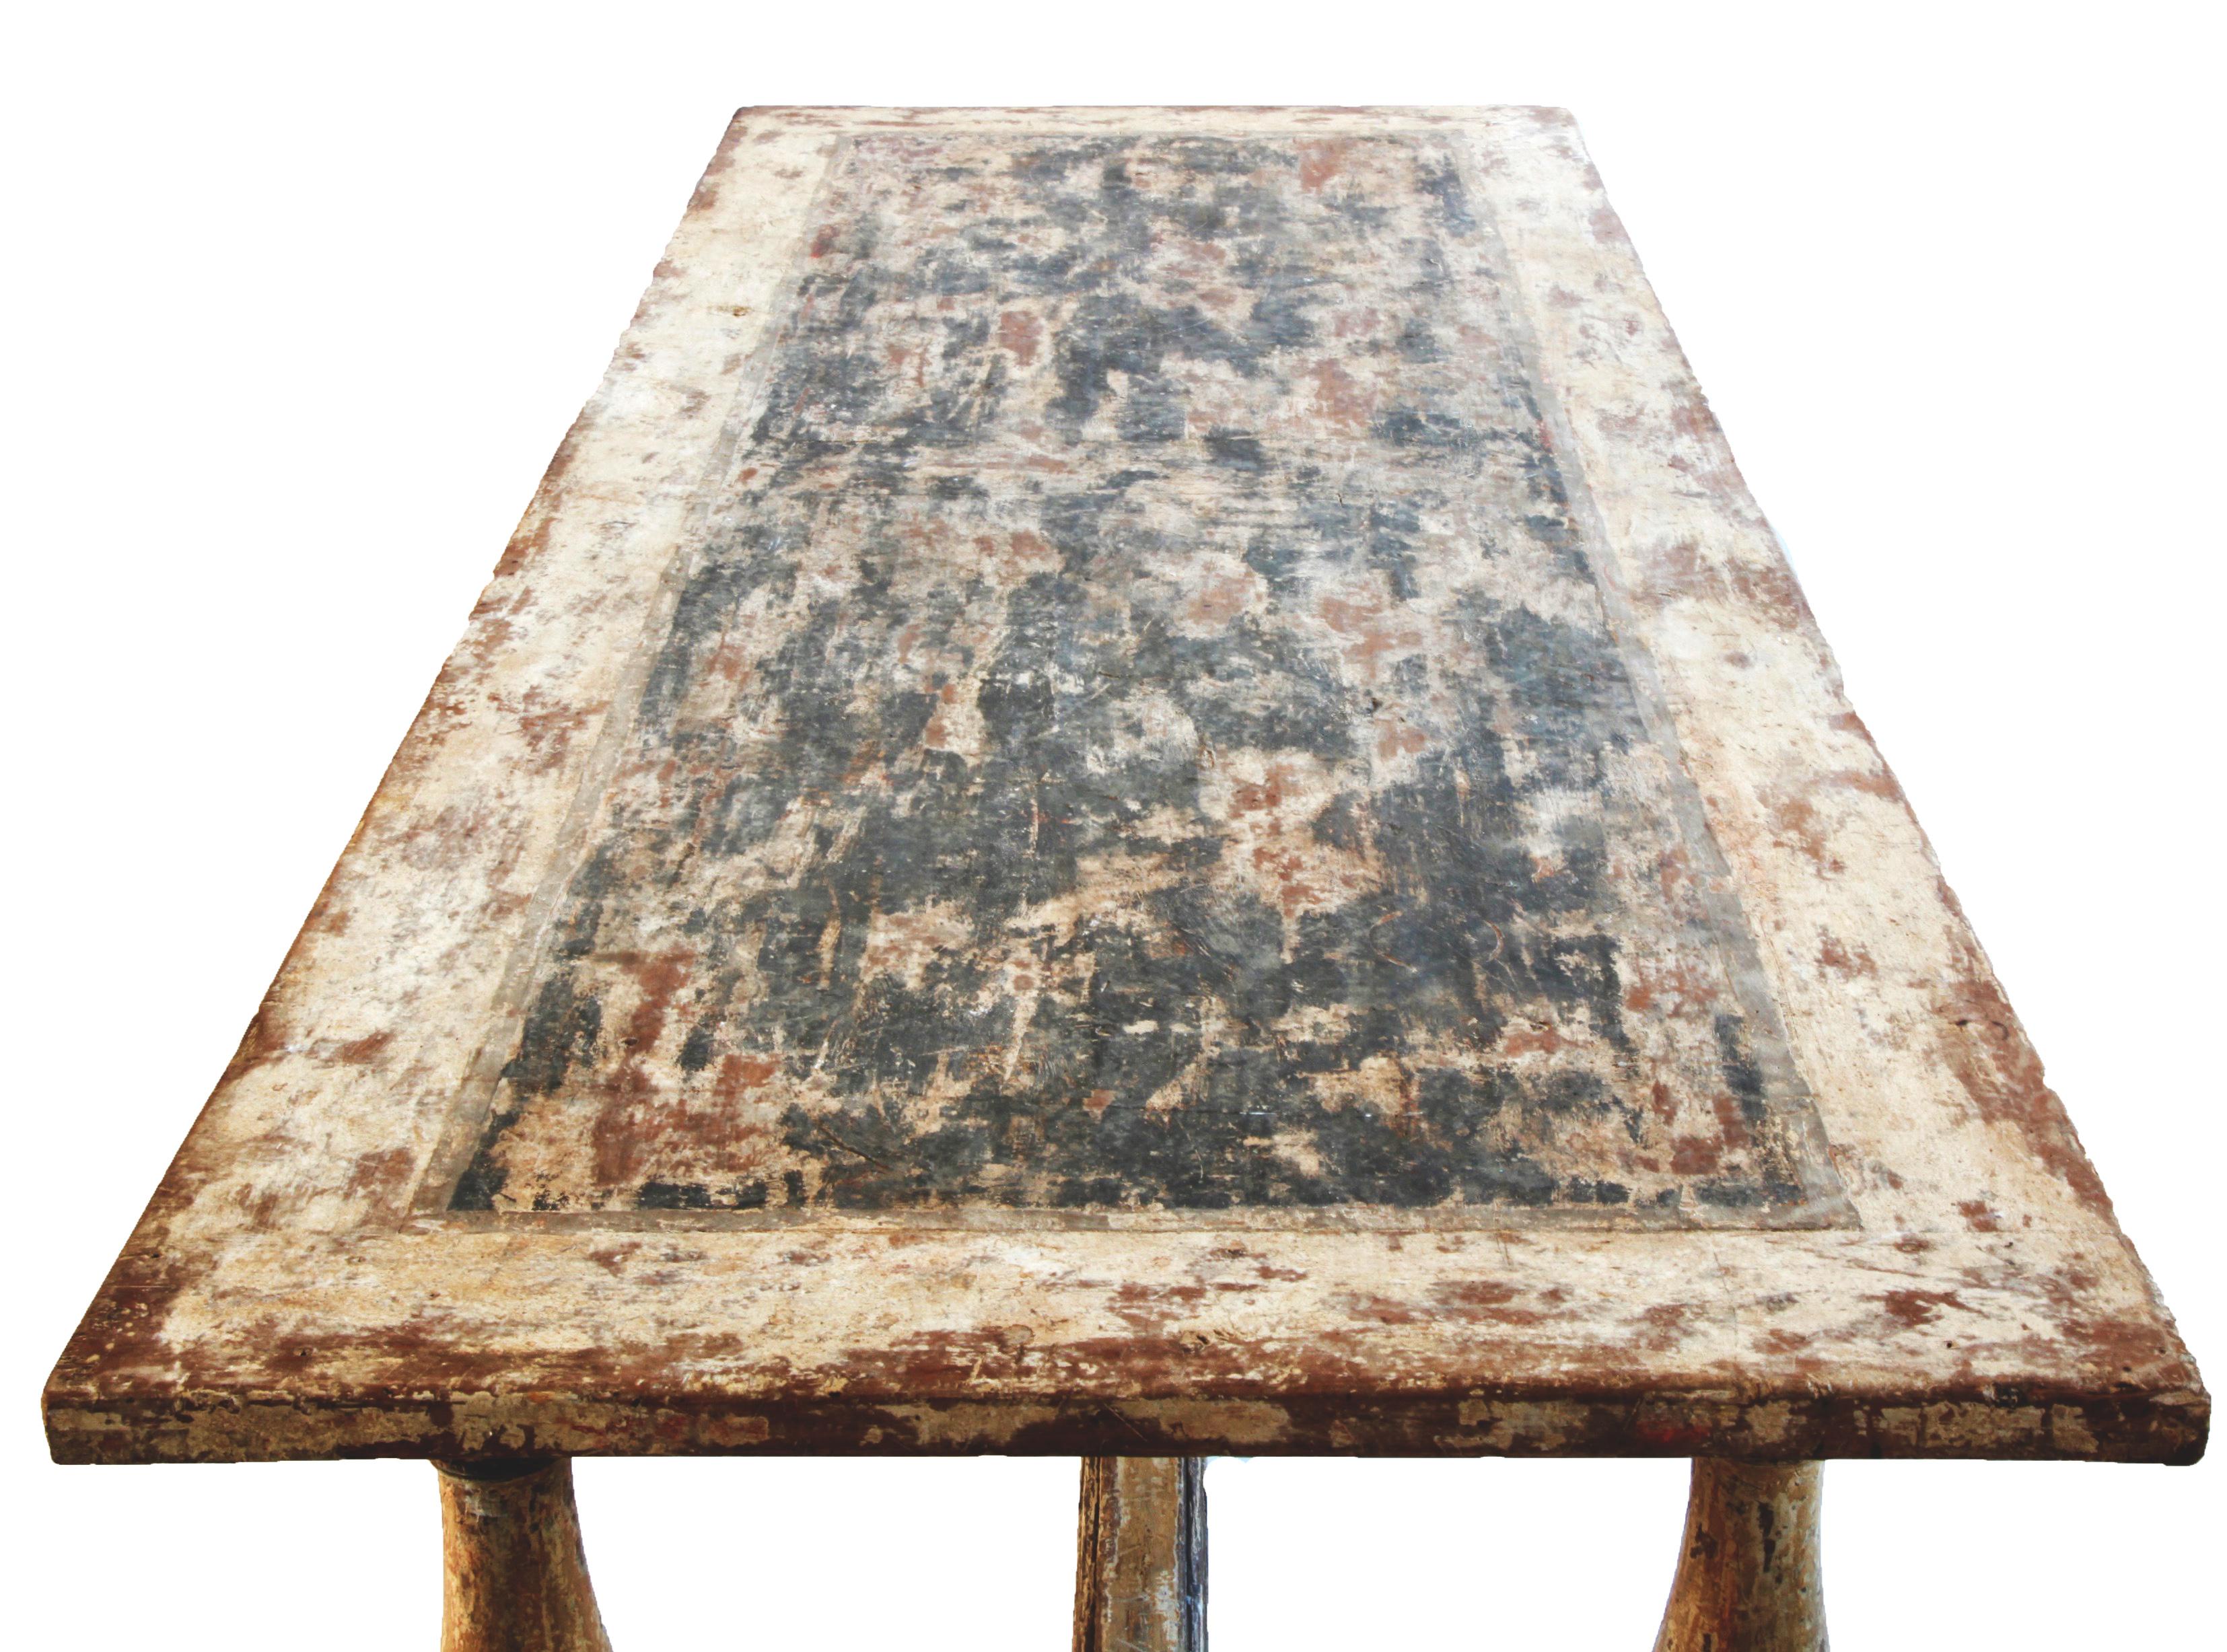 This robust and spirited, late 18th century rustic farmhouse table from Sicily, Italy is made in solid pine wood and has an apron and turned legs embellished with simple mouldings and sits on a base frame 'H' stretcher. The table has its authentic